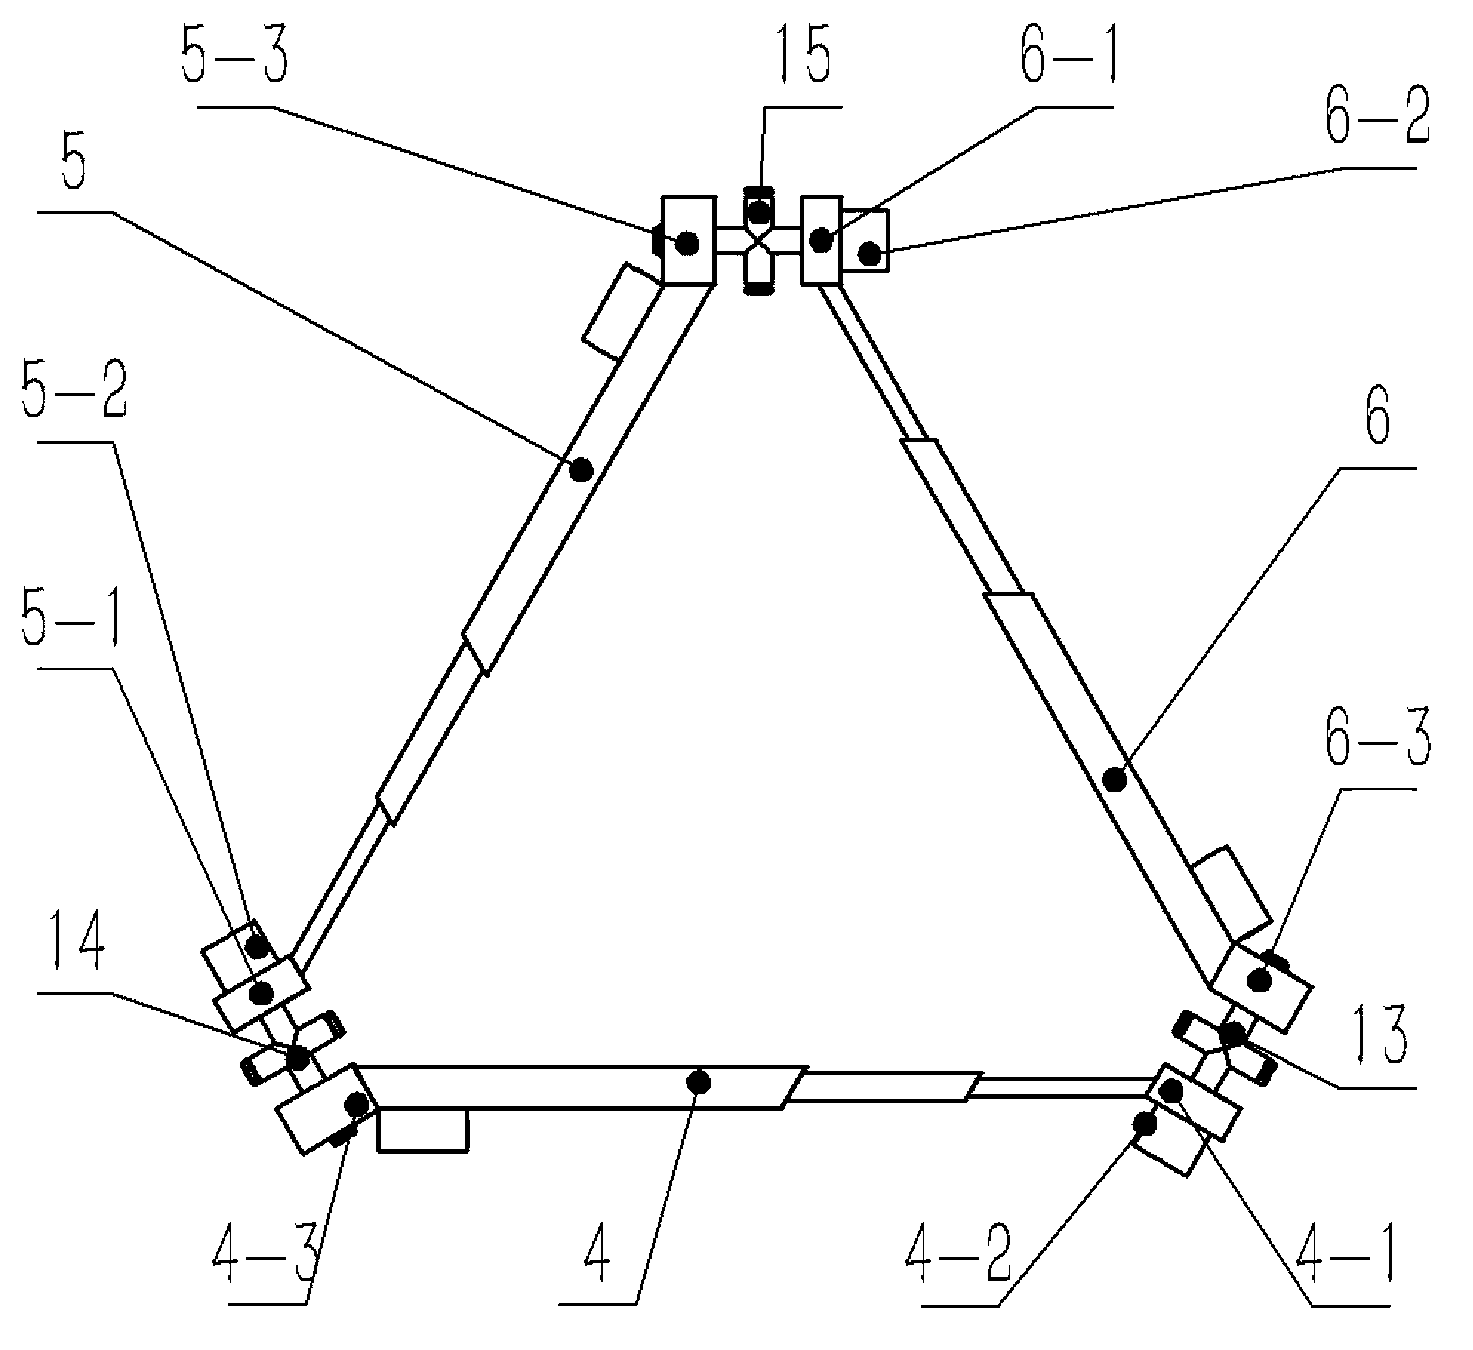 Multiple connection rod inserting movement mechanism